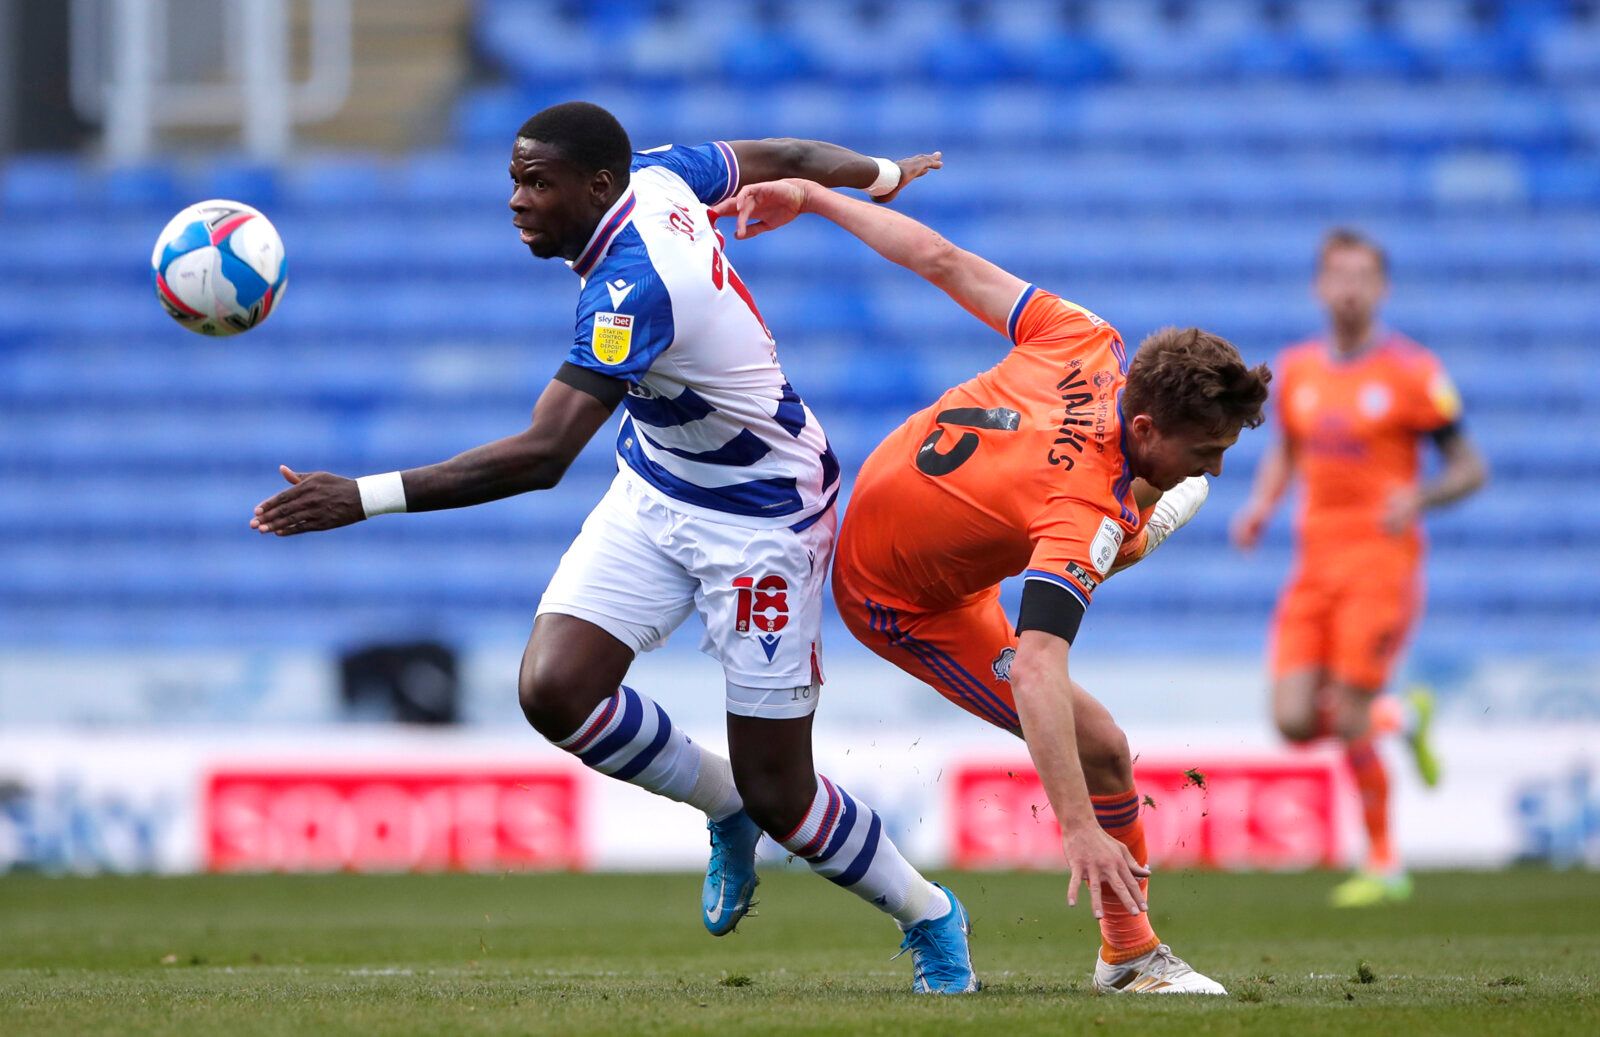 Soccer Football - Championship - Reading v Cardiff City - Madejski Stadium, Reading, Britain - April 16, 2021 Reading's Lucas Joao in action with Cardiff City's Will Vaulks Action Images/Andrew Couldridge EDITORIAL USE ONLY. No use with unauthorized audio, video, data, fixture lists, club/league logos or 'live' services. Online in-match use limited to 75 images, no video emulation. No use in betting, games or single club /league/player publications.  Please contact your account representative fo